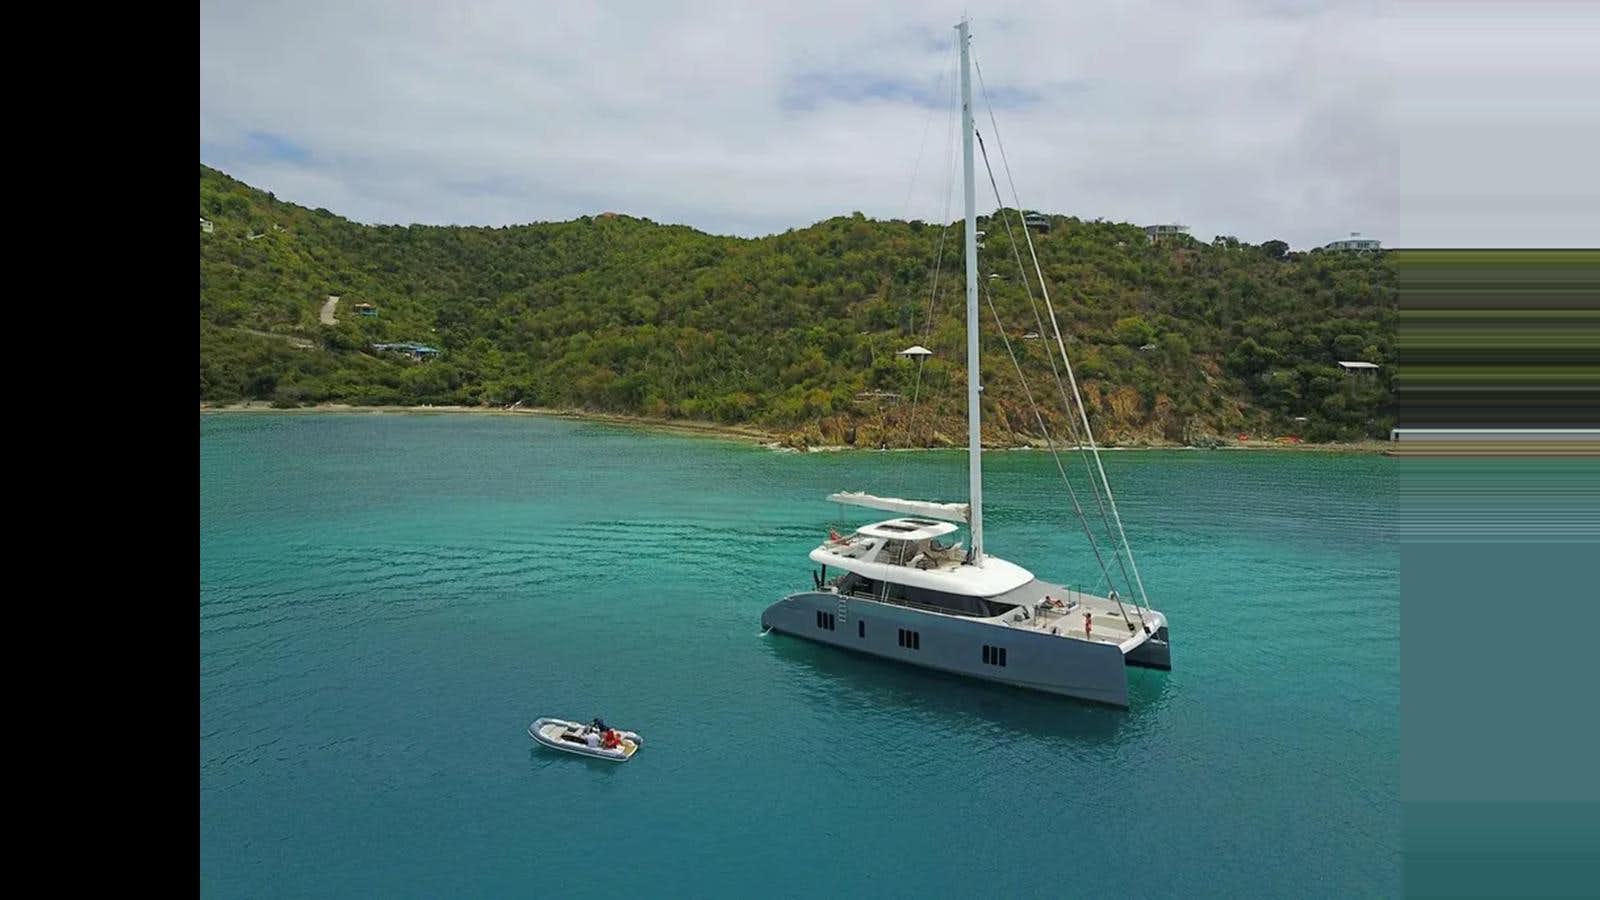 Seaclusion
Yacht for Sale